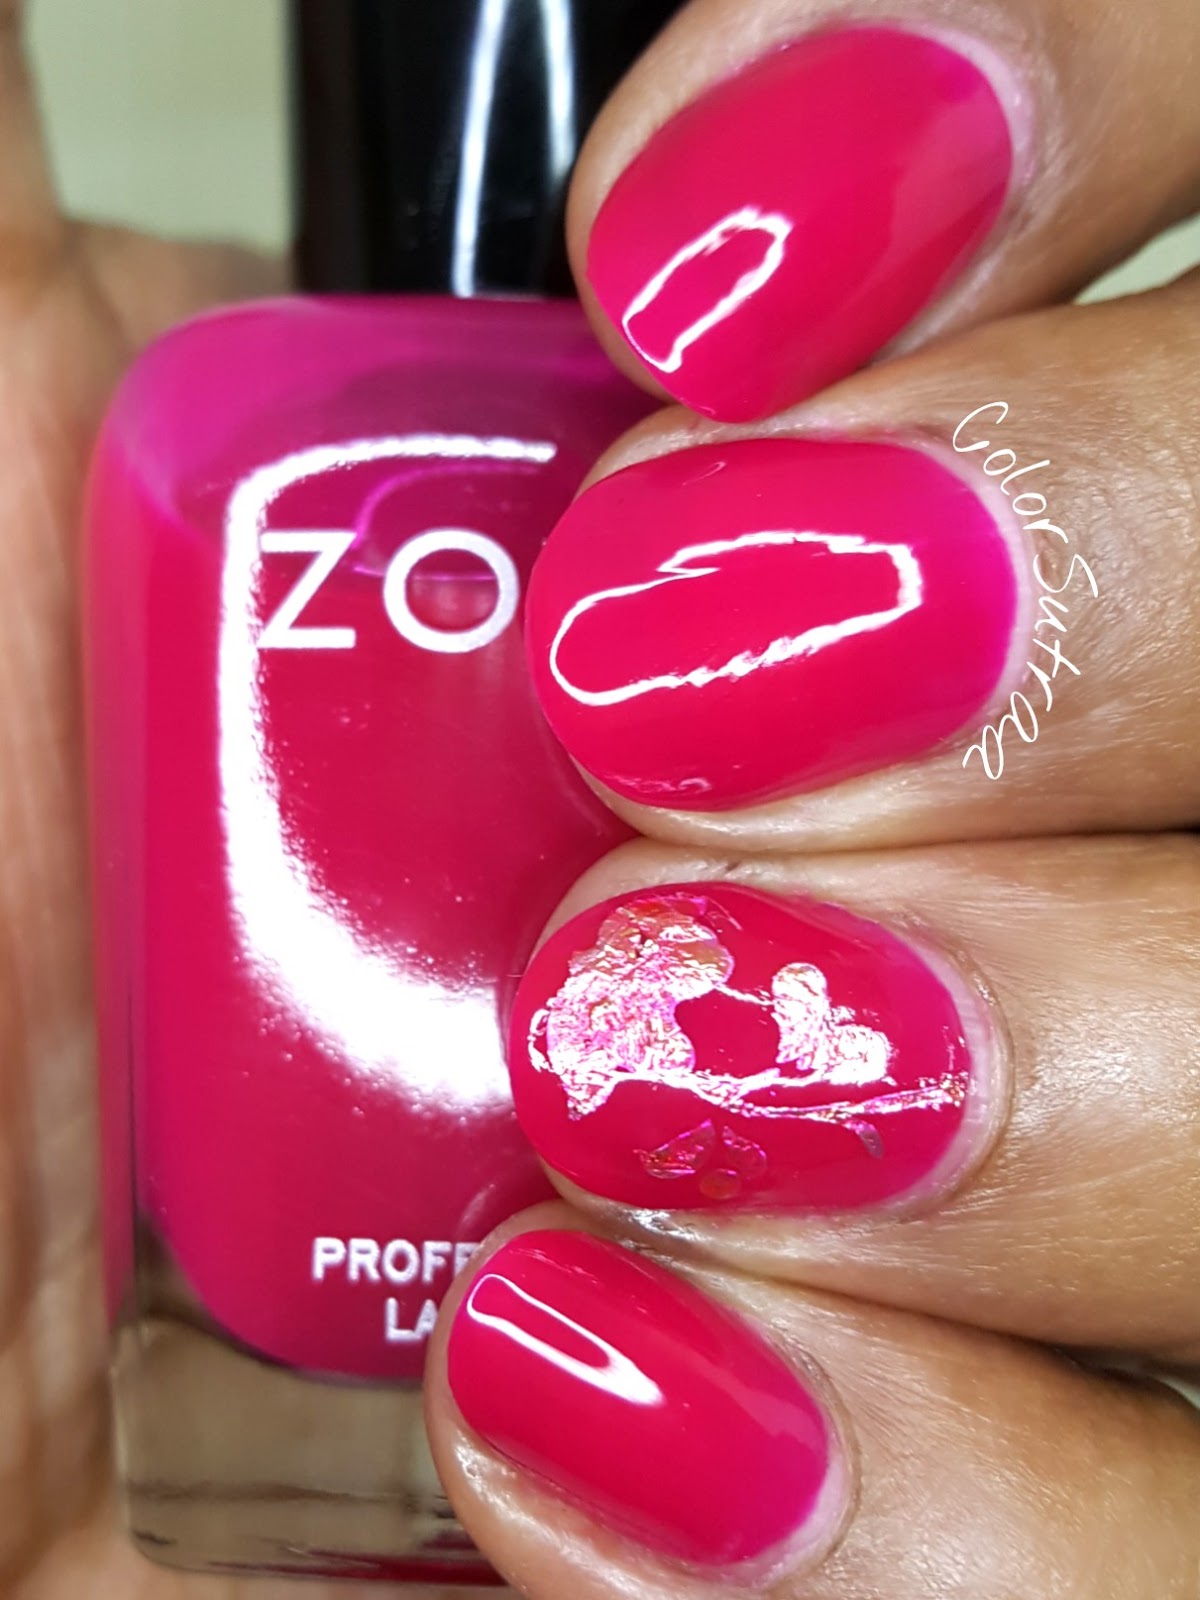 Zoya Jelly Brites | Live Application Review - YouTube